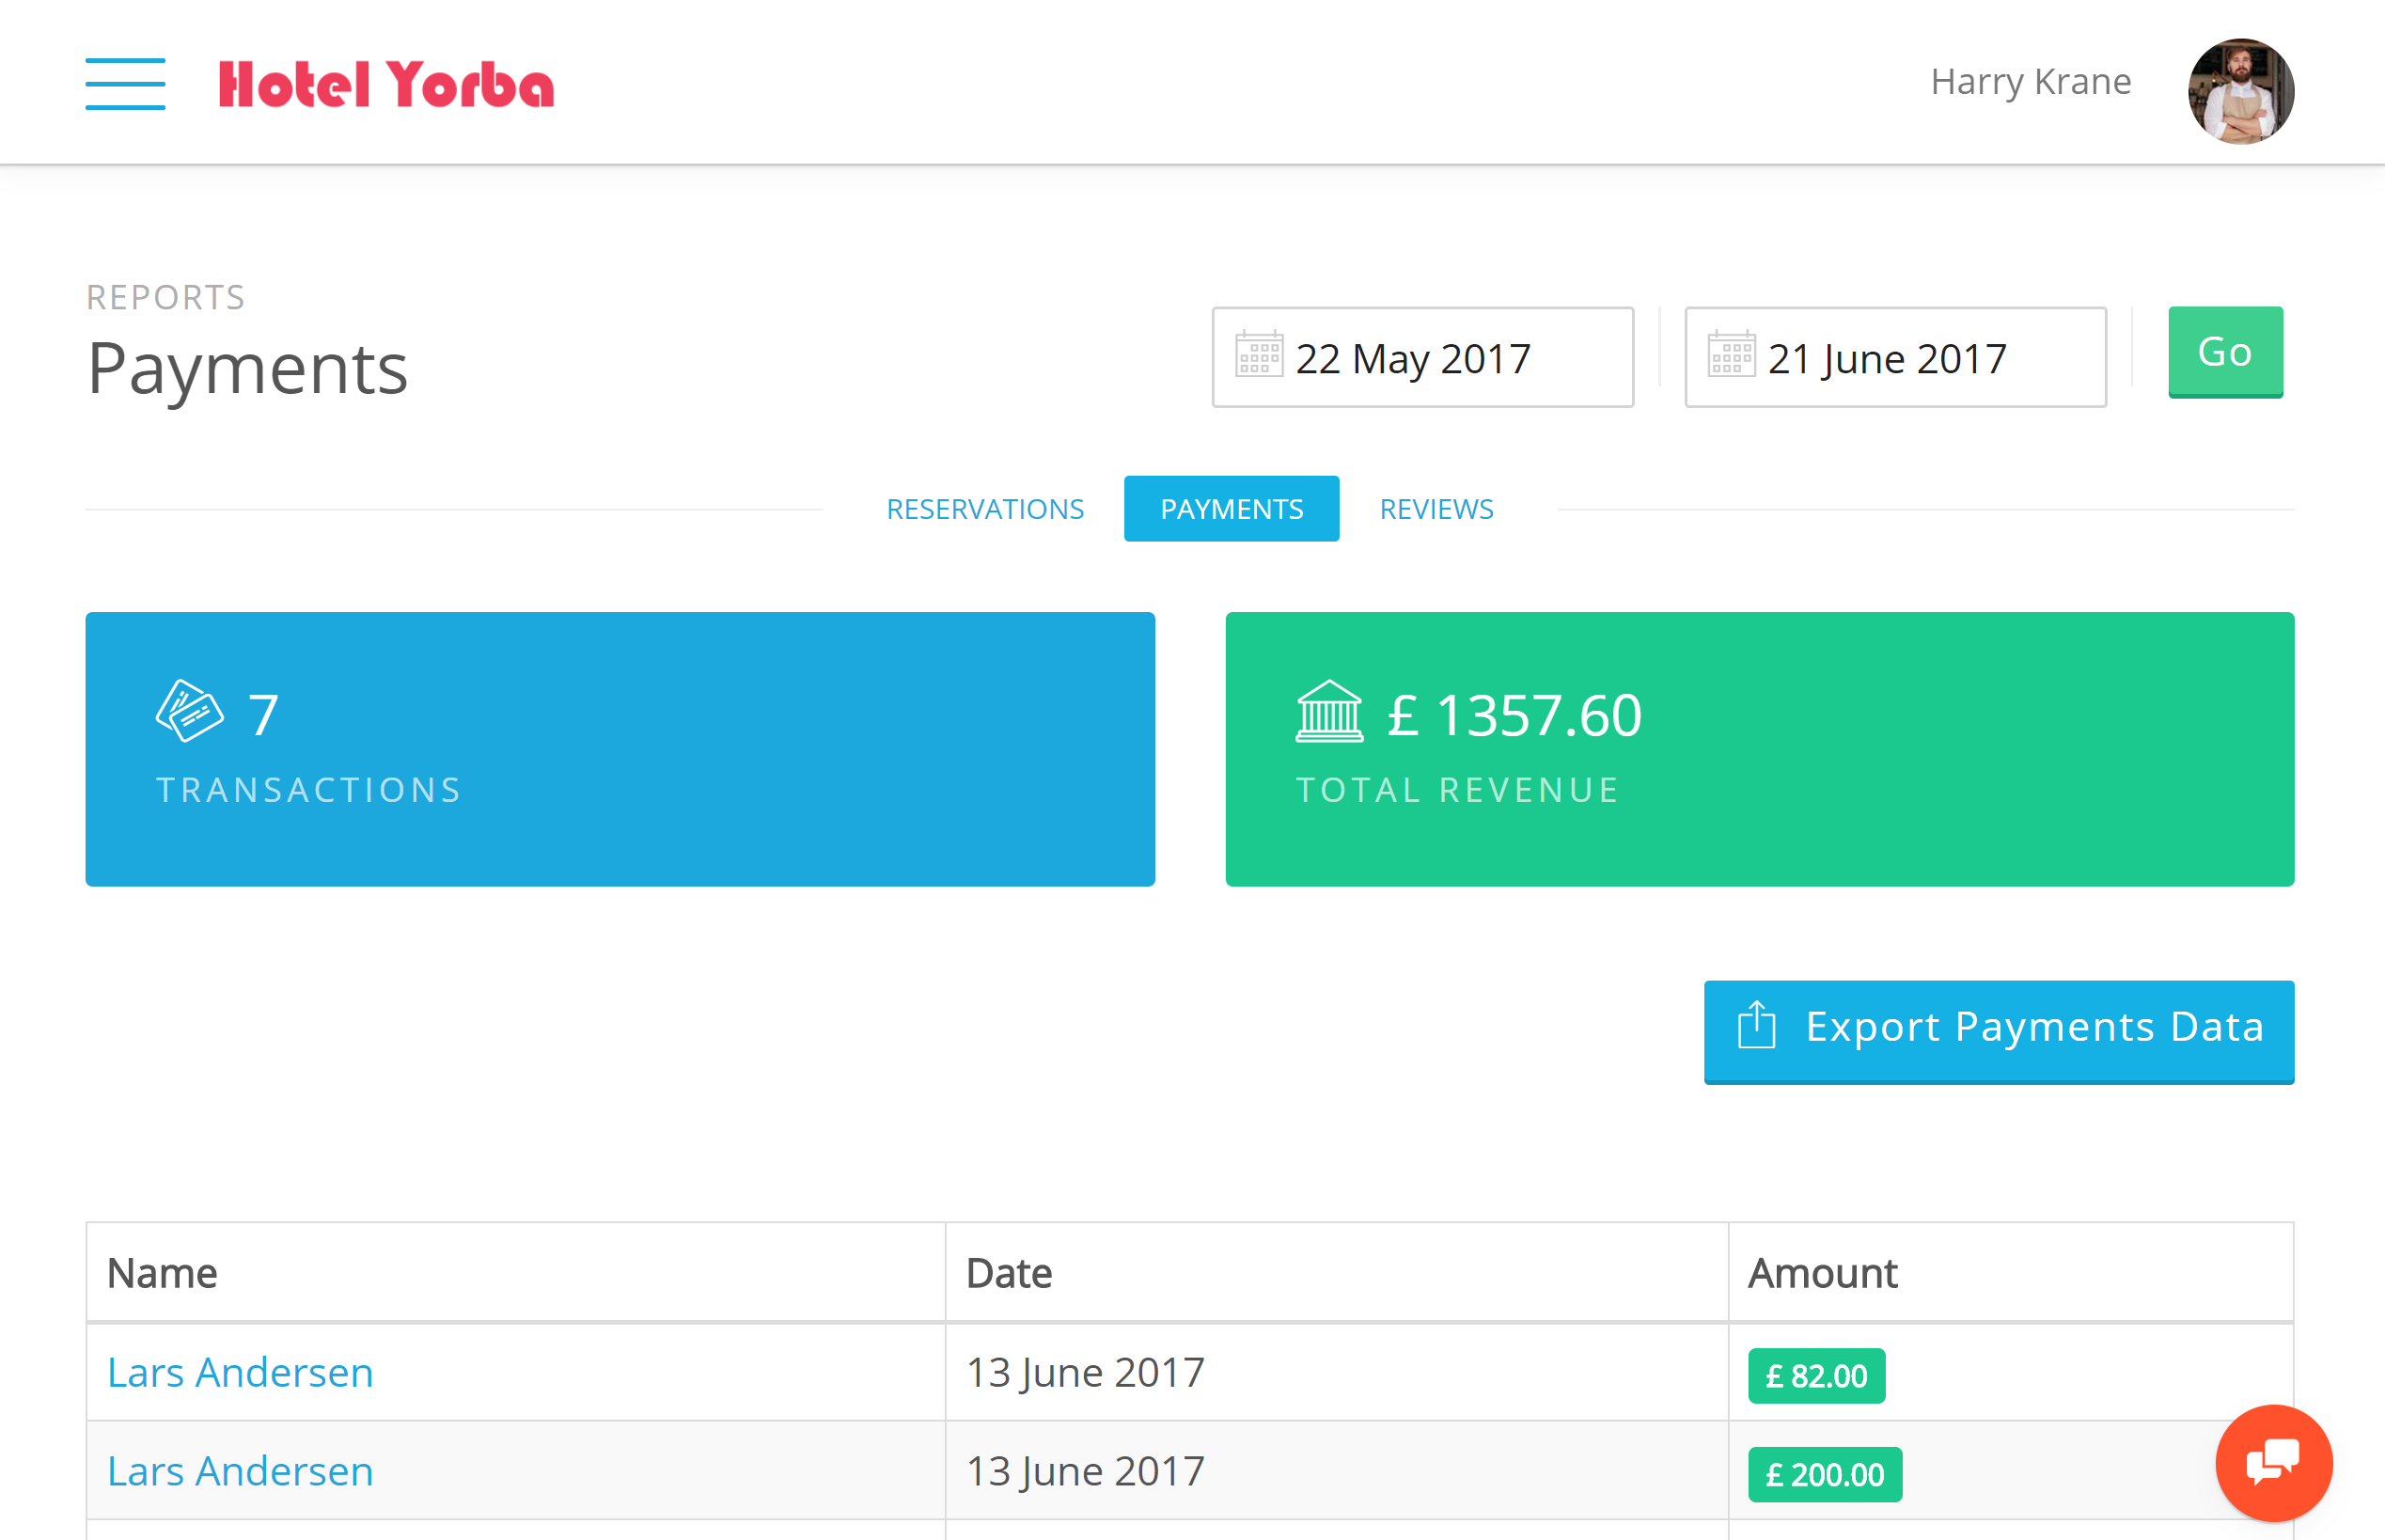 Updates to Payment Processing Front Desk manager to process payments at any point through the lifetime of a reservation. This means you can now accept deposits and partial payments from the time a booking is created, until it’s checked out. Bellebnb is a complete property management system for your Hotel. Sign up for free!.